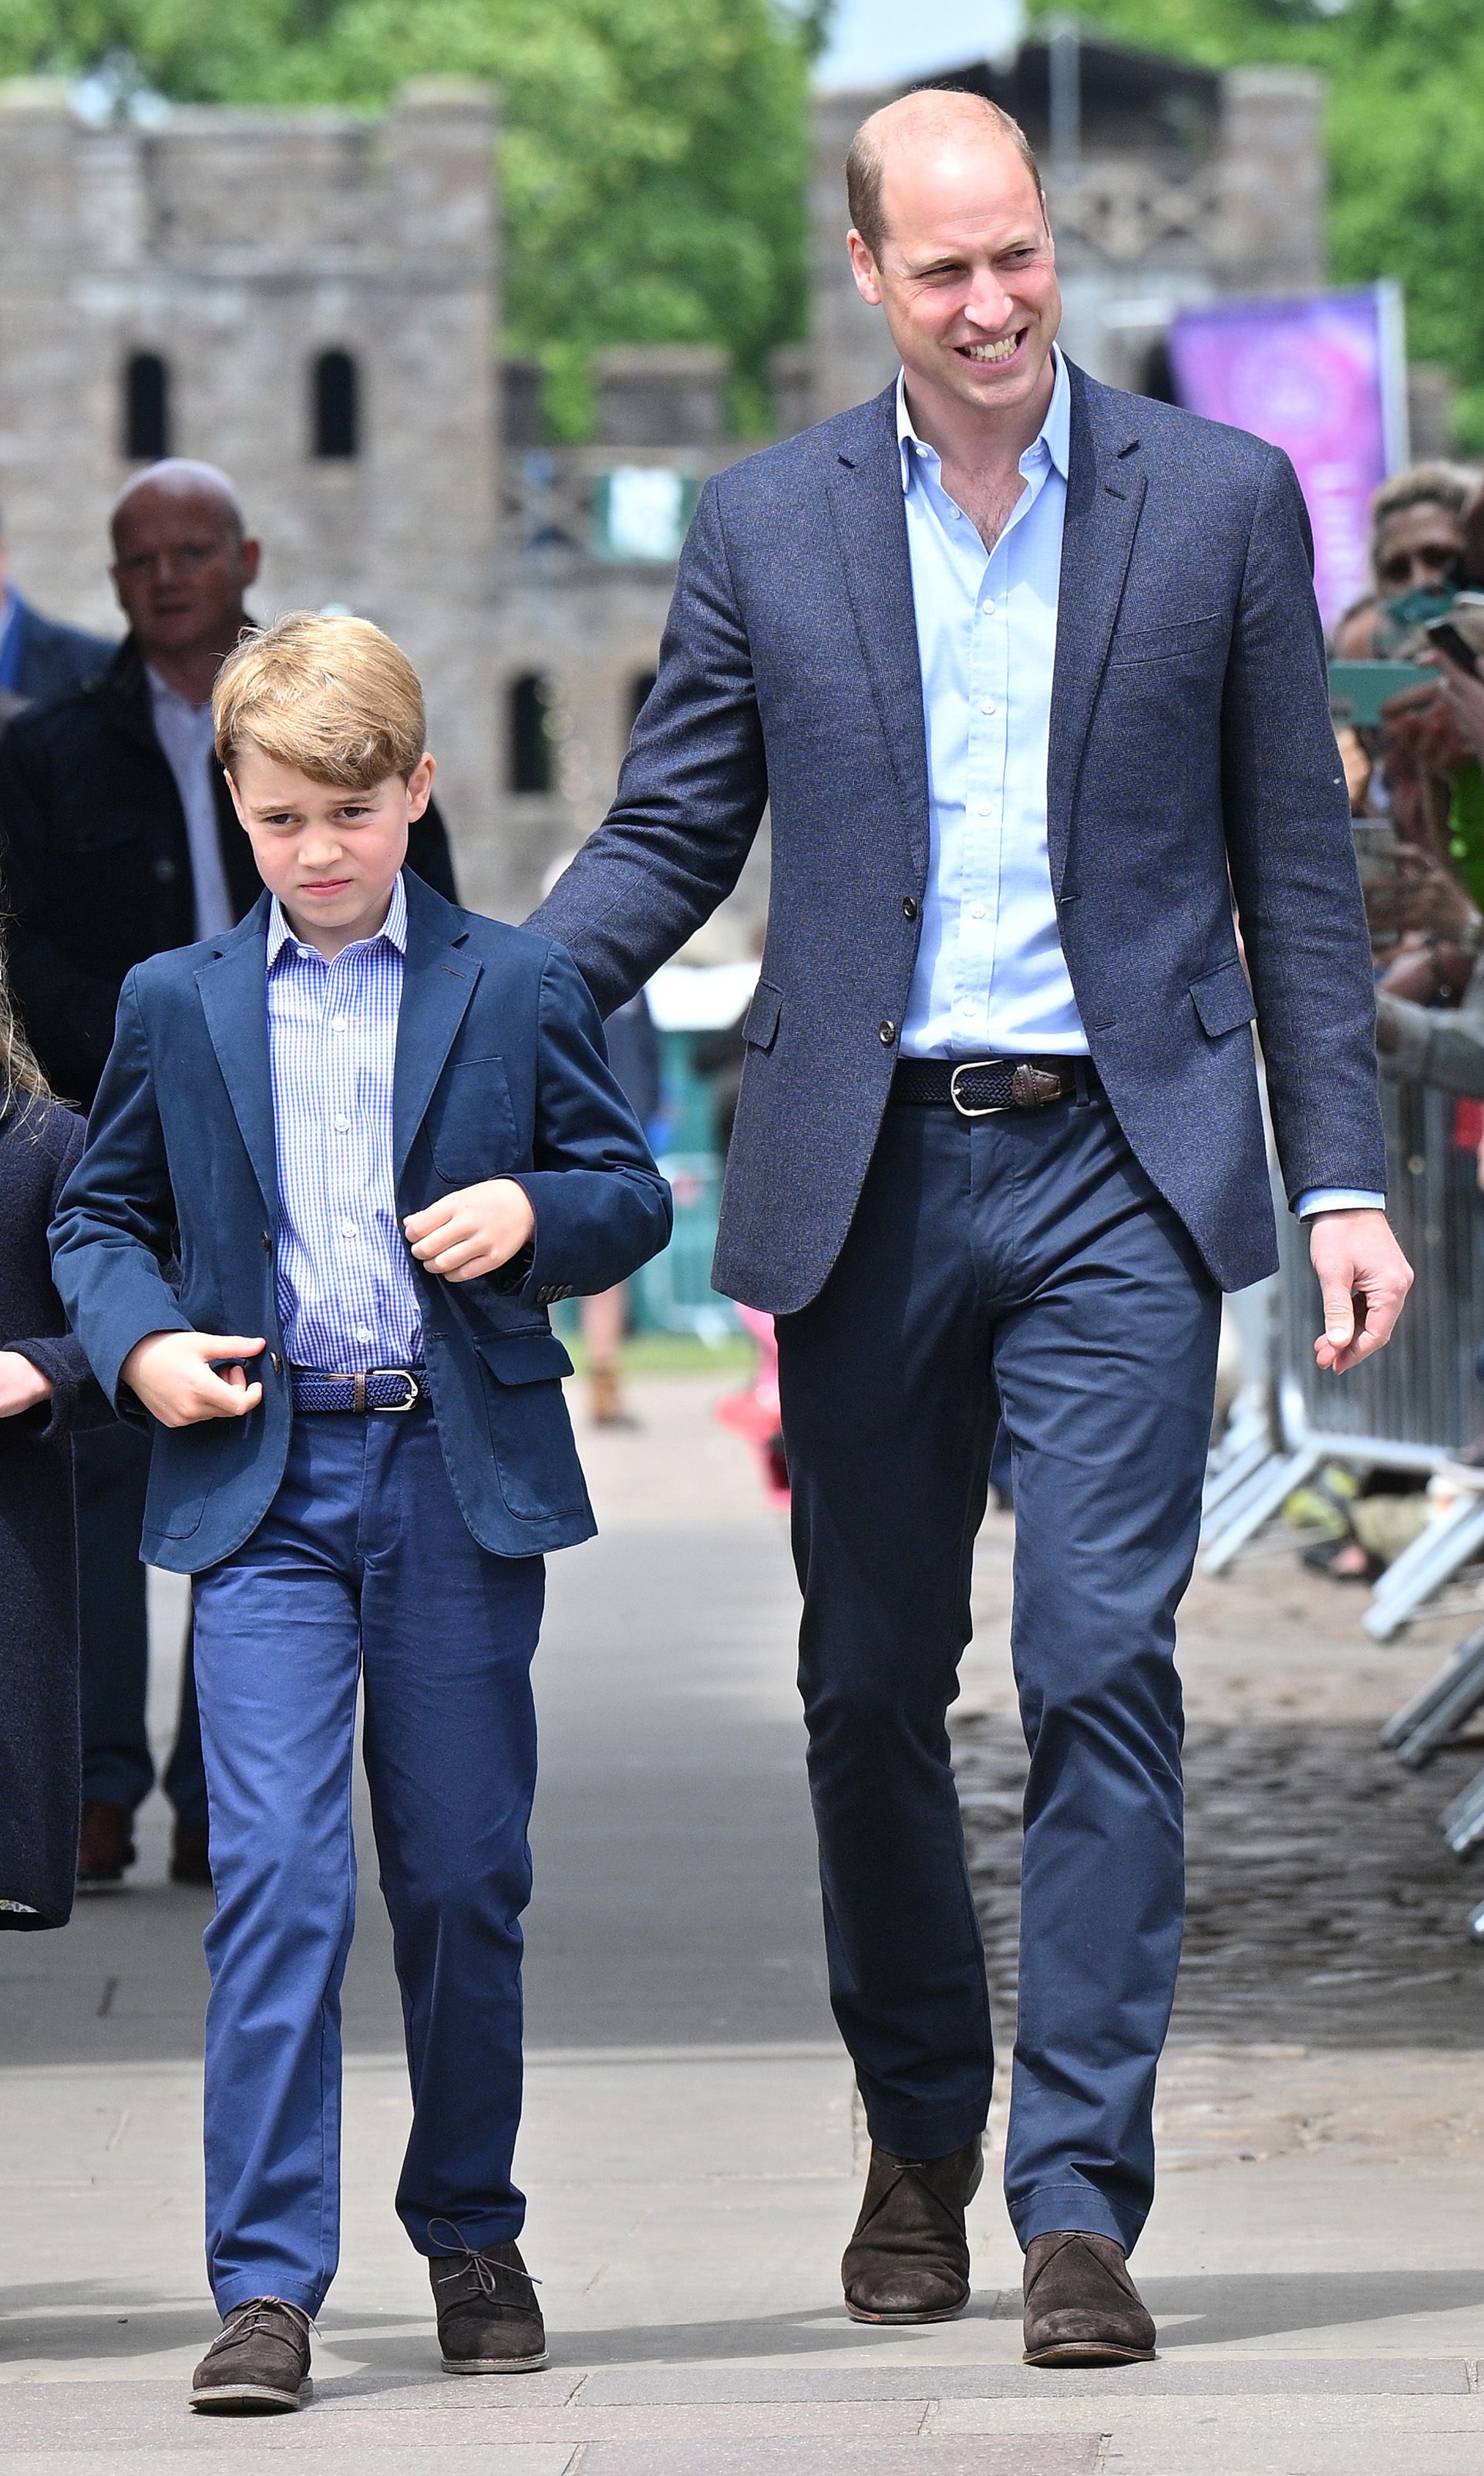 Prince George and Prince William leave Cardiff Castle in Wales following visit